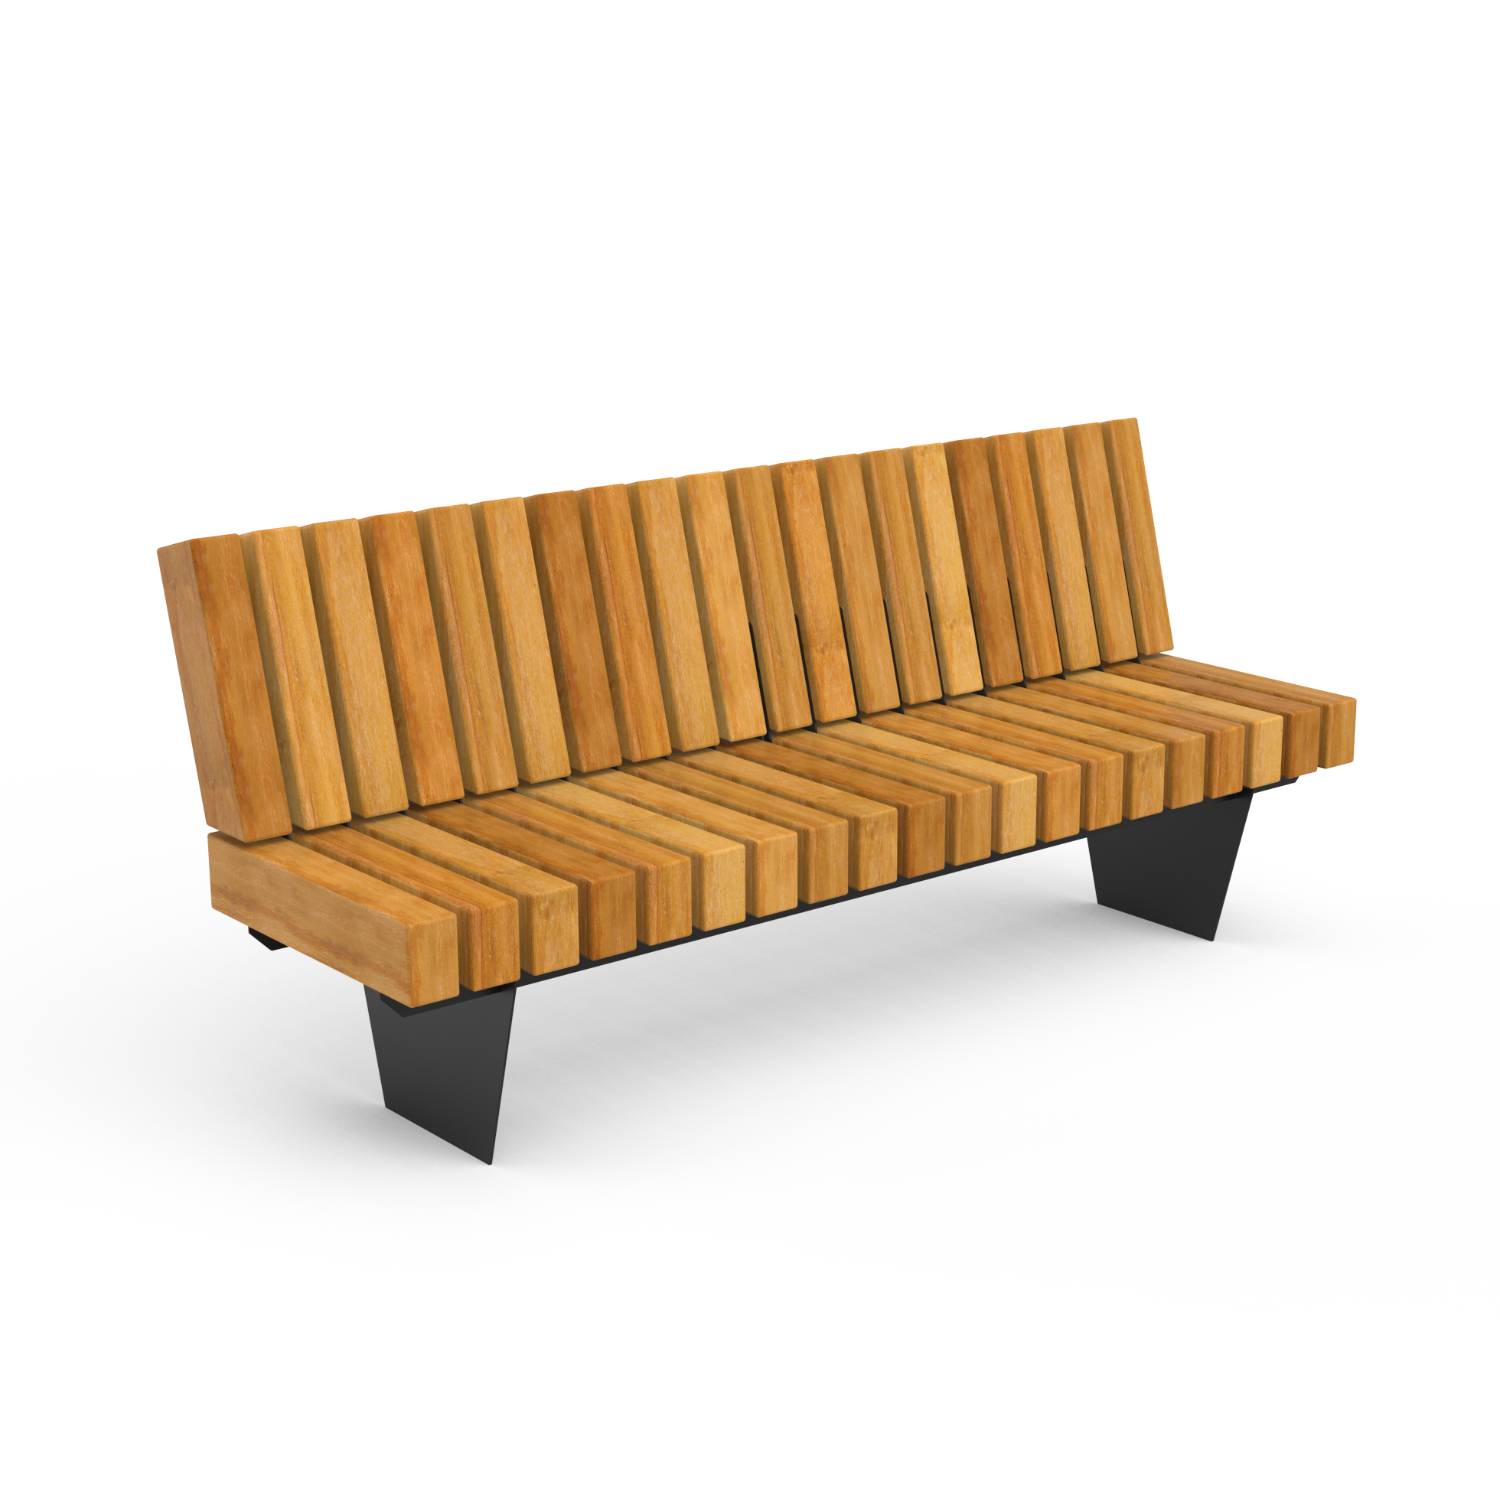 Plateu Seating - Seats and Benches